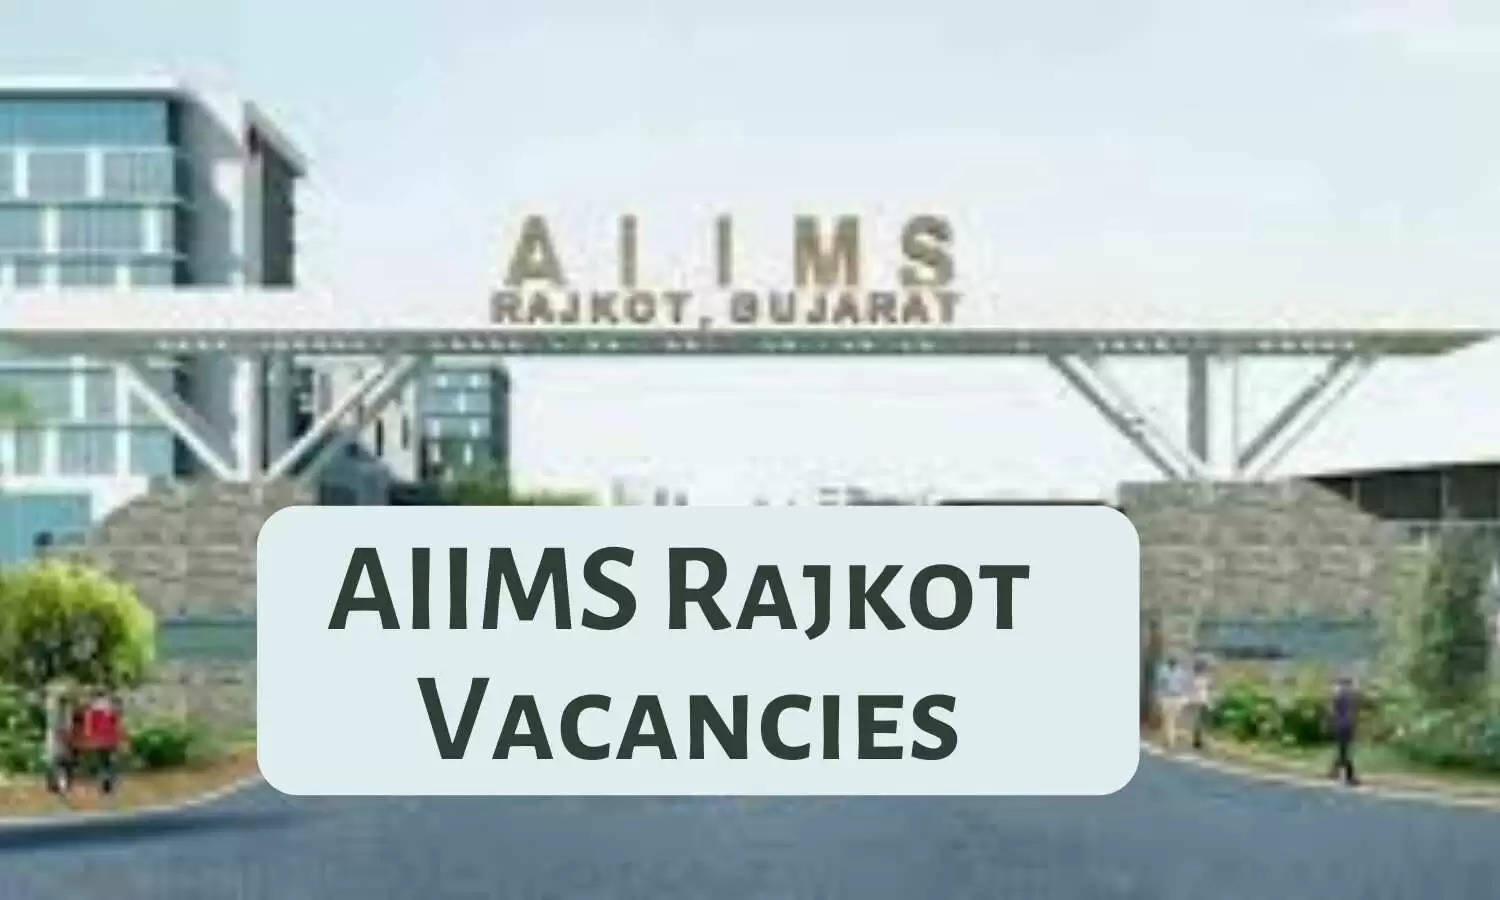 AIIMS Recruitment 2023: A great opportunity has emerged to get a job (Sarkari Naukri) in All India Institute of Medical Sciences, Rajkot (AIIMS). AIIMS has sought applications to fill the posts of Professor, Additional Professor, Associate Professor, Assistant Professor (AIIMS Recruitment 2023). Interested and eligible candidates who want to apply for these vacant posts (AIIMS Recruitment 2023), can apply by visiting the official website of AIIMS at aiims.edu. The last date to apply for these posts (AIIMS Recruitment 2023) is 13 February 2023.  Apart from this, candidates can also apply for these posts (AIIMS Recruitment 2023) directly by clicking on this official link aiims.edu. If you want more detailed information related to this recruitment, then you can see and download the official notification (AIIMS Recruitment 2023) through this link AIIMS Recruitment 2023 Notification PDF. A total of 43 posts will be filled under this recruitment (AIIMS Recruitment 2023) process.  Important Dates for AIIMS Recruitment 2023  Online Application Starting Date –  Last date for online application - 13 February 2023  Details of posts for AIIMS Recruitment 2023  Total No. of Posts- : 43 Posts  Eligibility Criteria for AIIMS Recruitment 2023  Professor, Additional Professor, Associate Professor, Assistant Professor: Bachelor's degree from recognized institute and experience  Age Limit for AIIMS Recruitment 2023  Professor, Additional Professor, Associate Professor, Assistant Professor - The age of the candidates will be 58 years.  Salary for AIIMS Recruitment 2023  Professor, Additional Professor, Associate Professor, Assistant Professor – As per rules  Selection Process for AIIMS Recruitment 2023  Professor, Additional Professor, Associate Professor, Assistant Professor - will be done on the basis of interview.  How to apply for AIIMS Recruitment 2023  Interested and eligible candidates can apply through the official website of AIIMS (aiims.edu) by 13 February 2023. For detailed information in this regard, refer to the official notification given above.  If you want to get a government job, then apply for this recruitment before the last date and fulfill your dream of getting a government job. You can visit naukrinama.com for more such latest government jobs information.